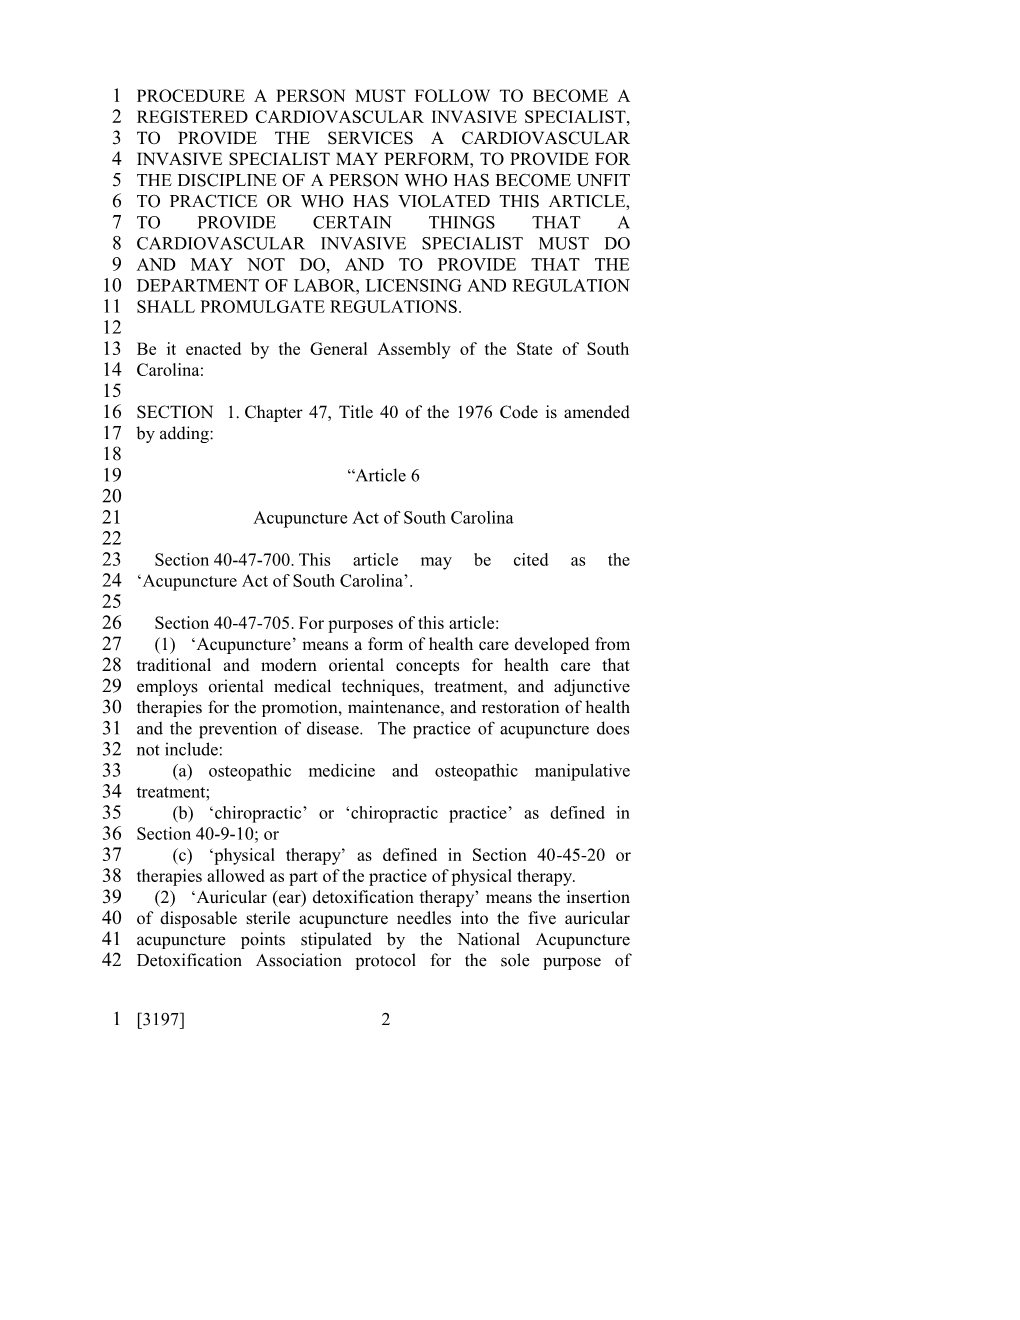 2005-2006 Bill 3197: Acupuncture Act; Registered Cardiovascular Invasive Specialist Act